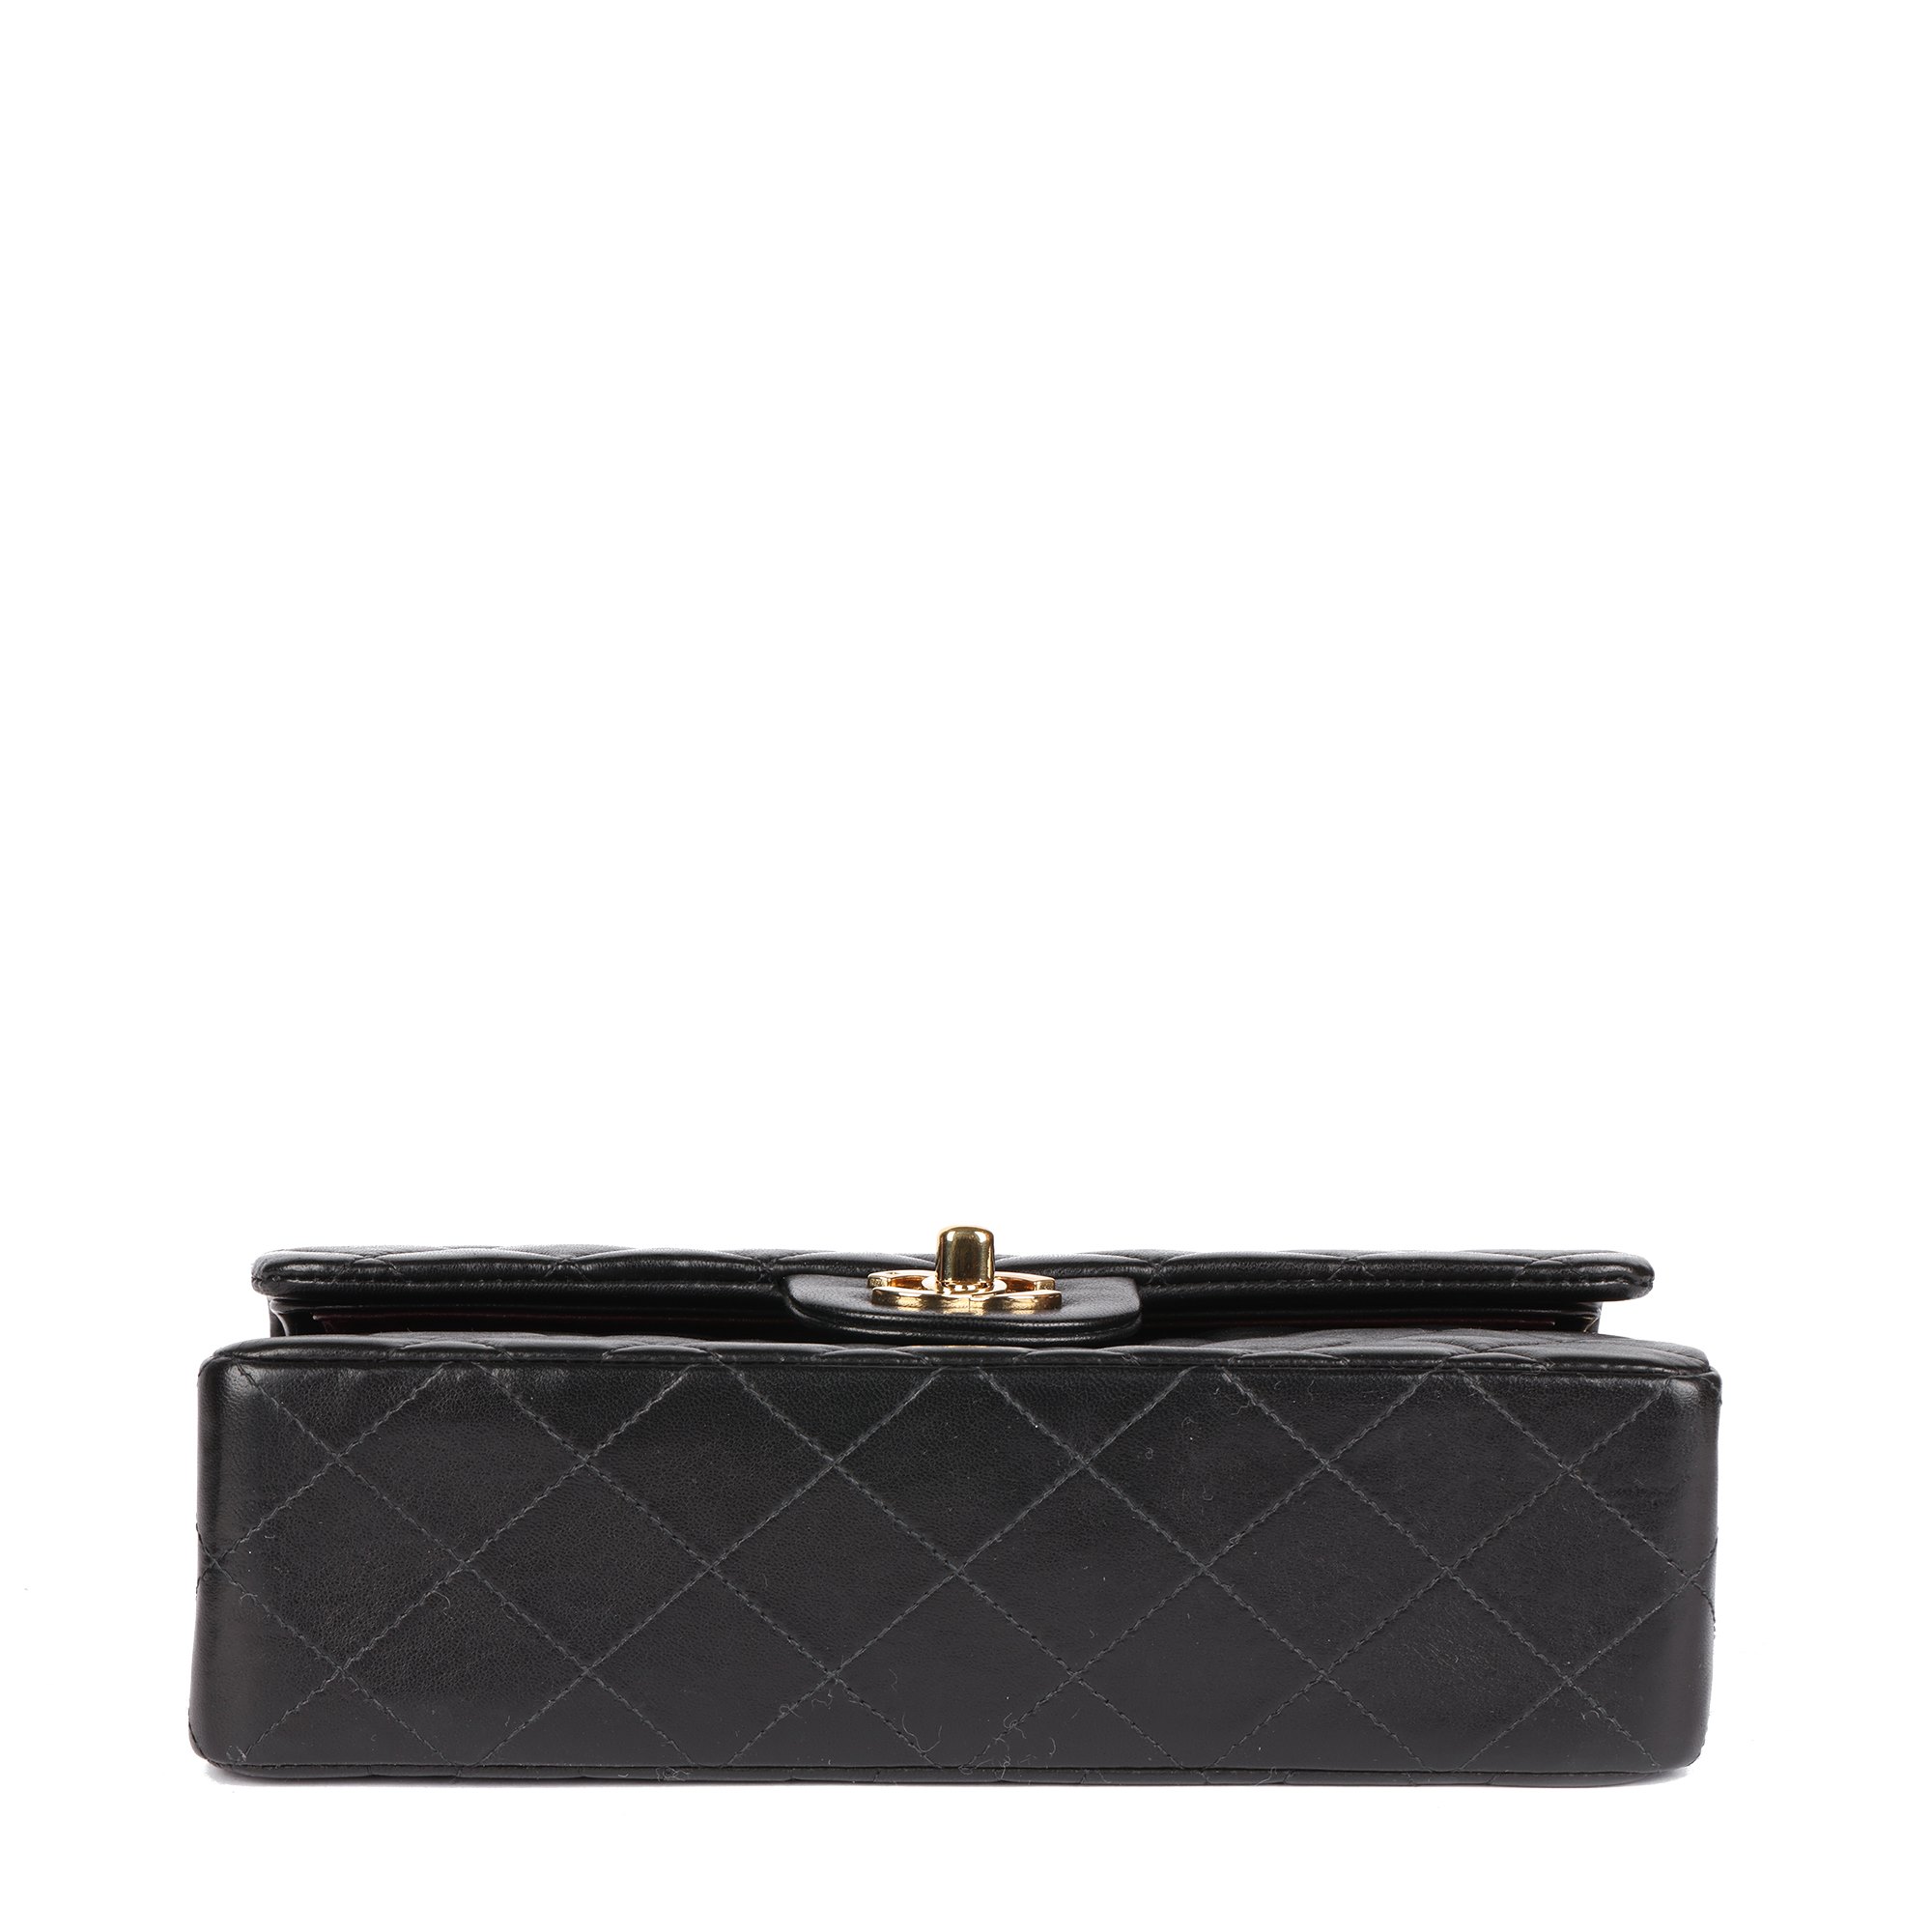 Chanel Black Quilted Lambskin Small Classic Double Flap Bag